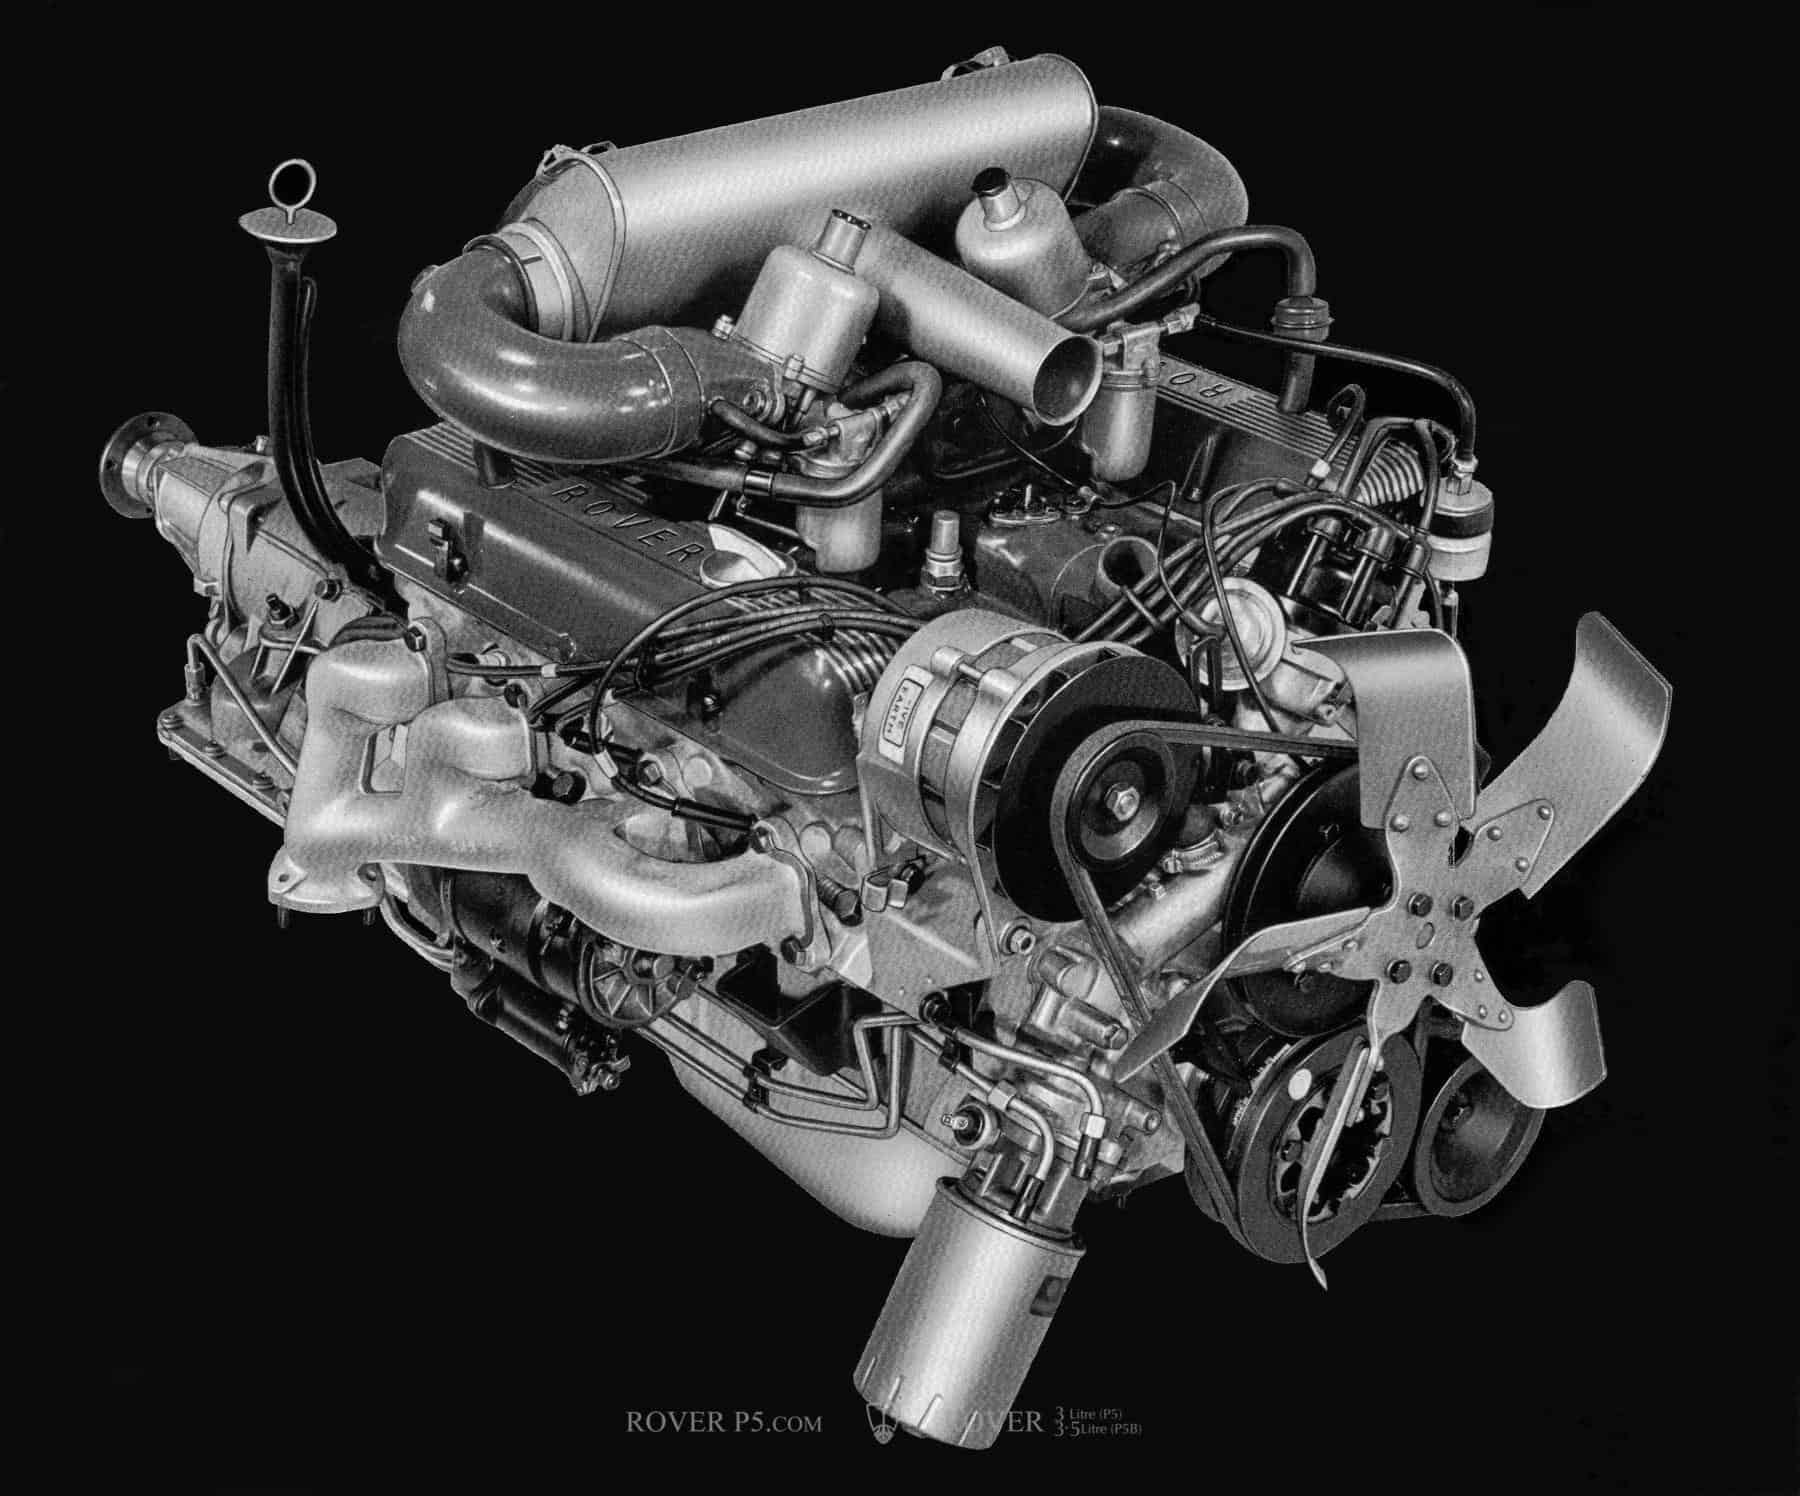 An Americans View of the Rover 3.5 Litre V8